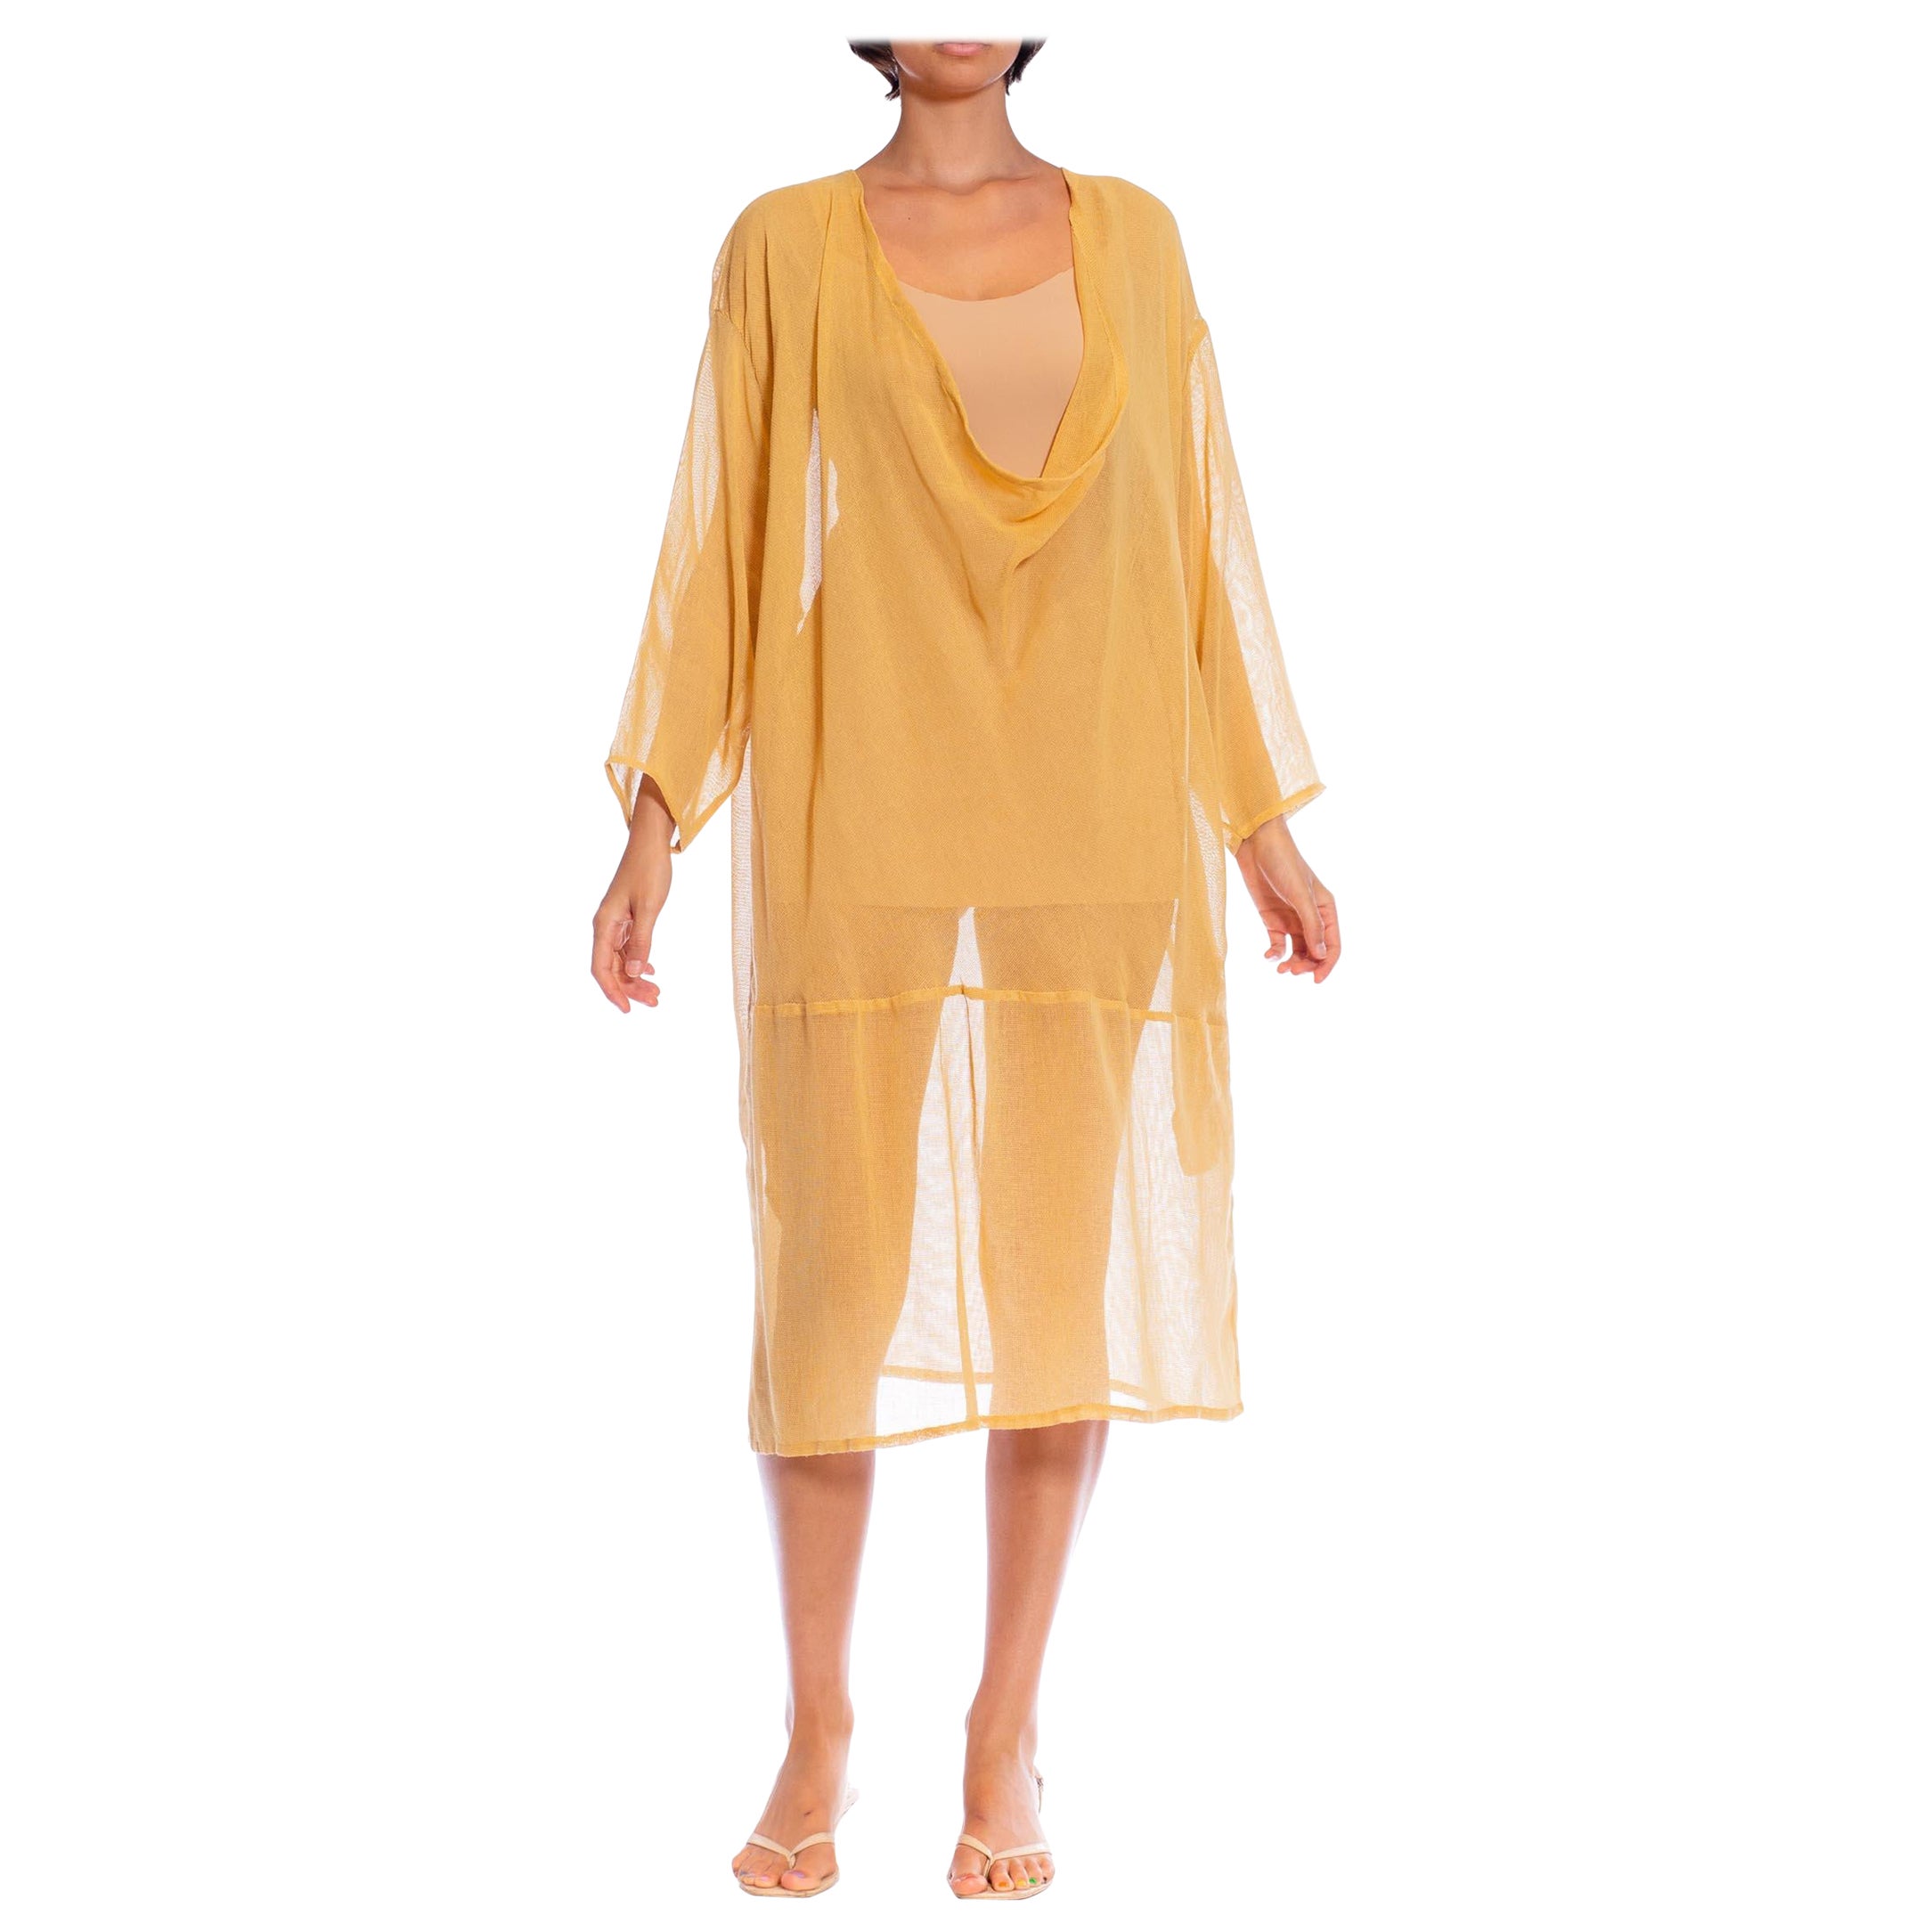 MORPHEW COLLECTION Mustard Yellow Cotton Blend Gauze Unisex Cowl-Neck Tunic Top For Sale